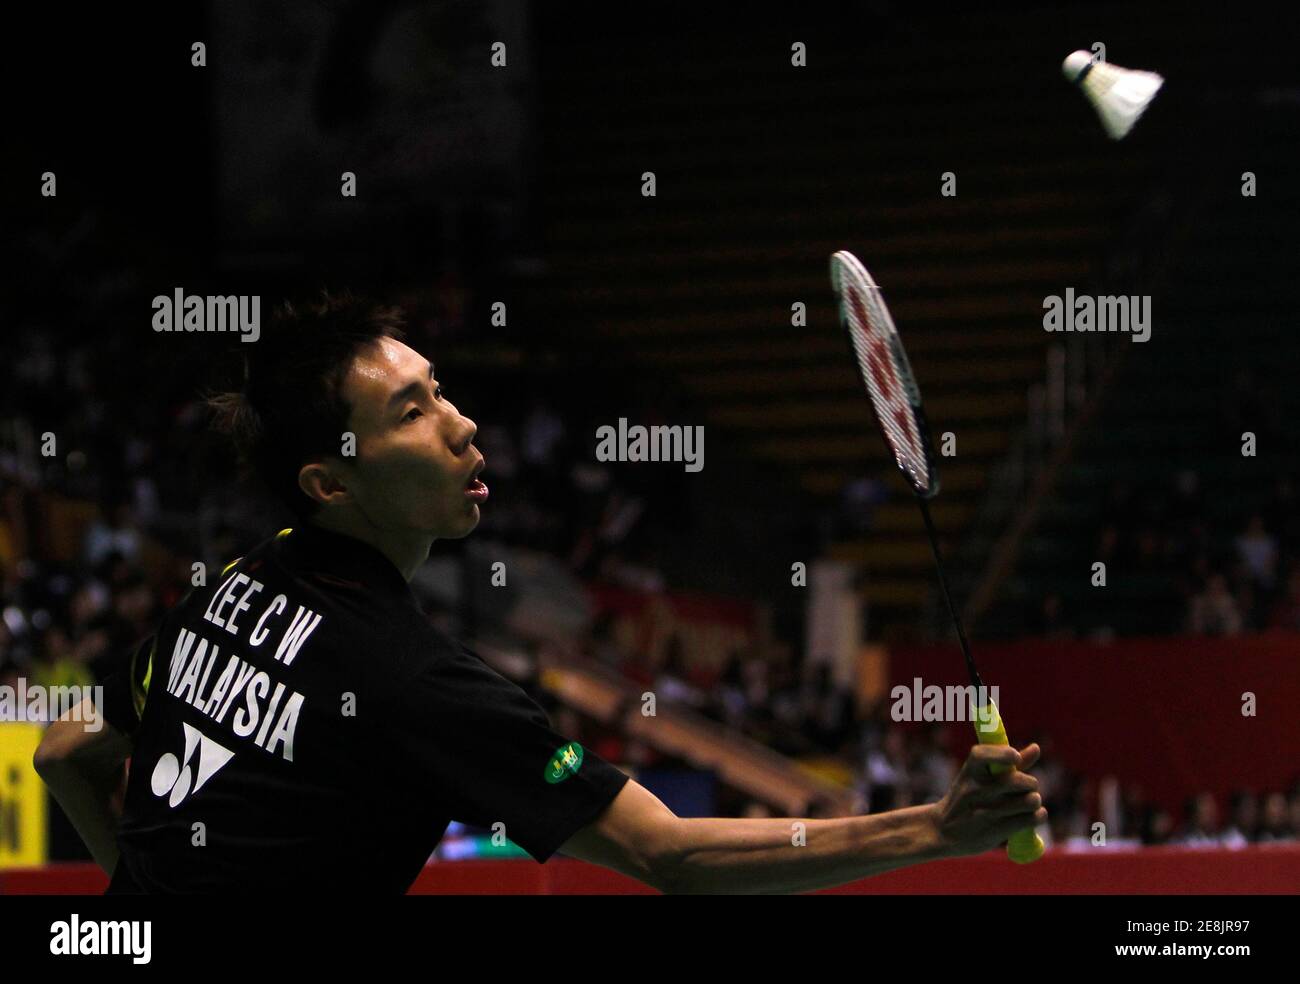 Lee Chong Wei of Malaysia plays a shot to Kenichi Tago of Japan during their men's singles quarter-final match at the Djarum Indonesia Open Super Series badminton tournament in Jakarta June 25, 2010. REUTERS/Beawiharta (INDONESIA - Tags: SPORT BADMINTON) Stock Photo